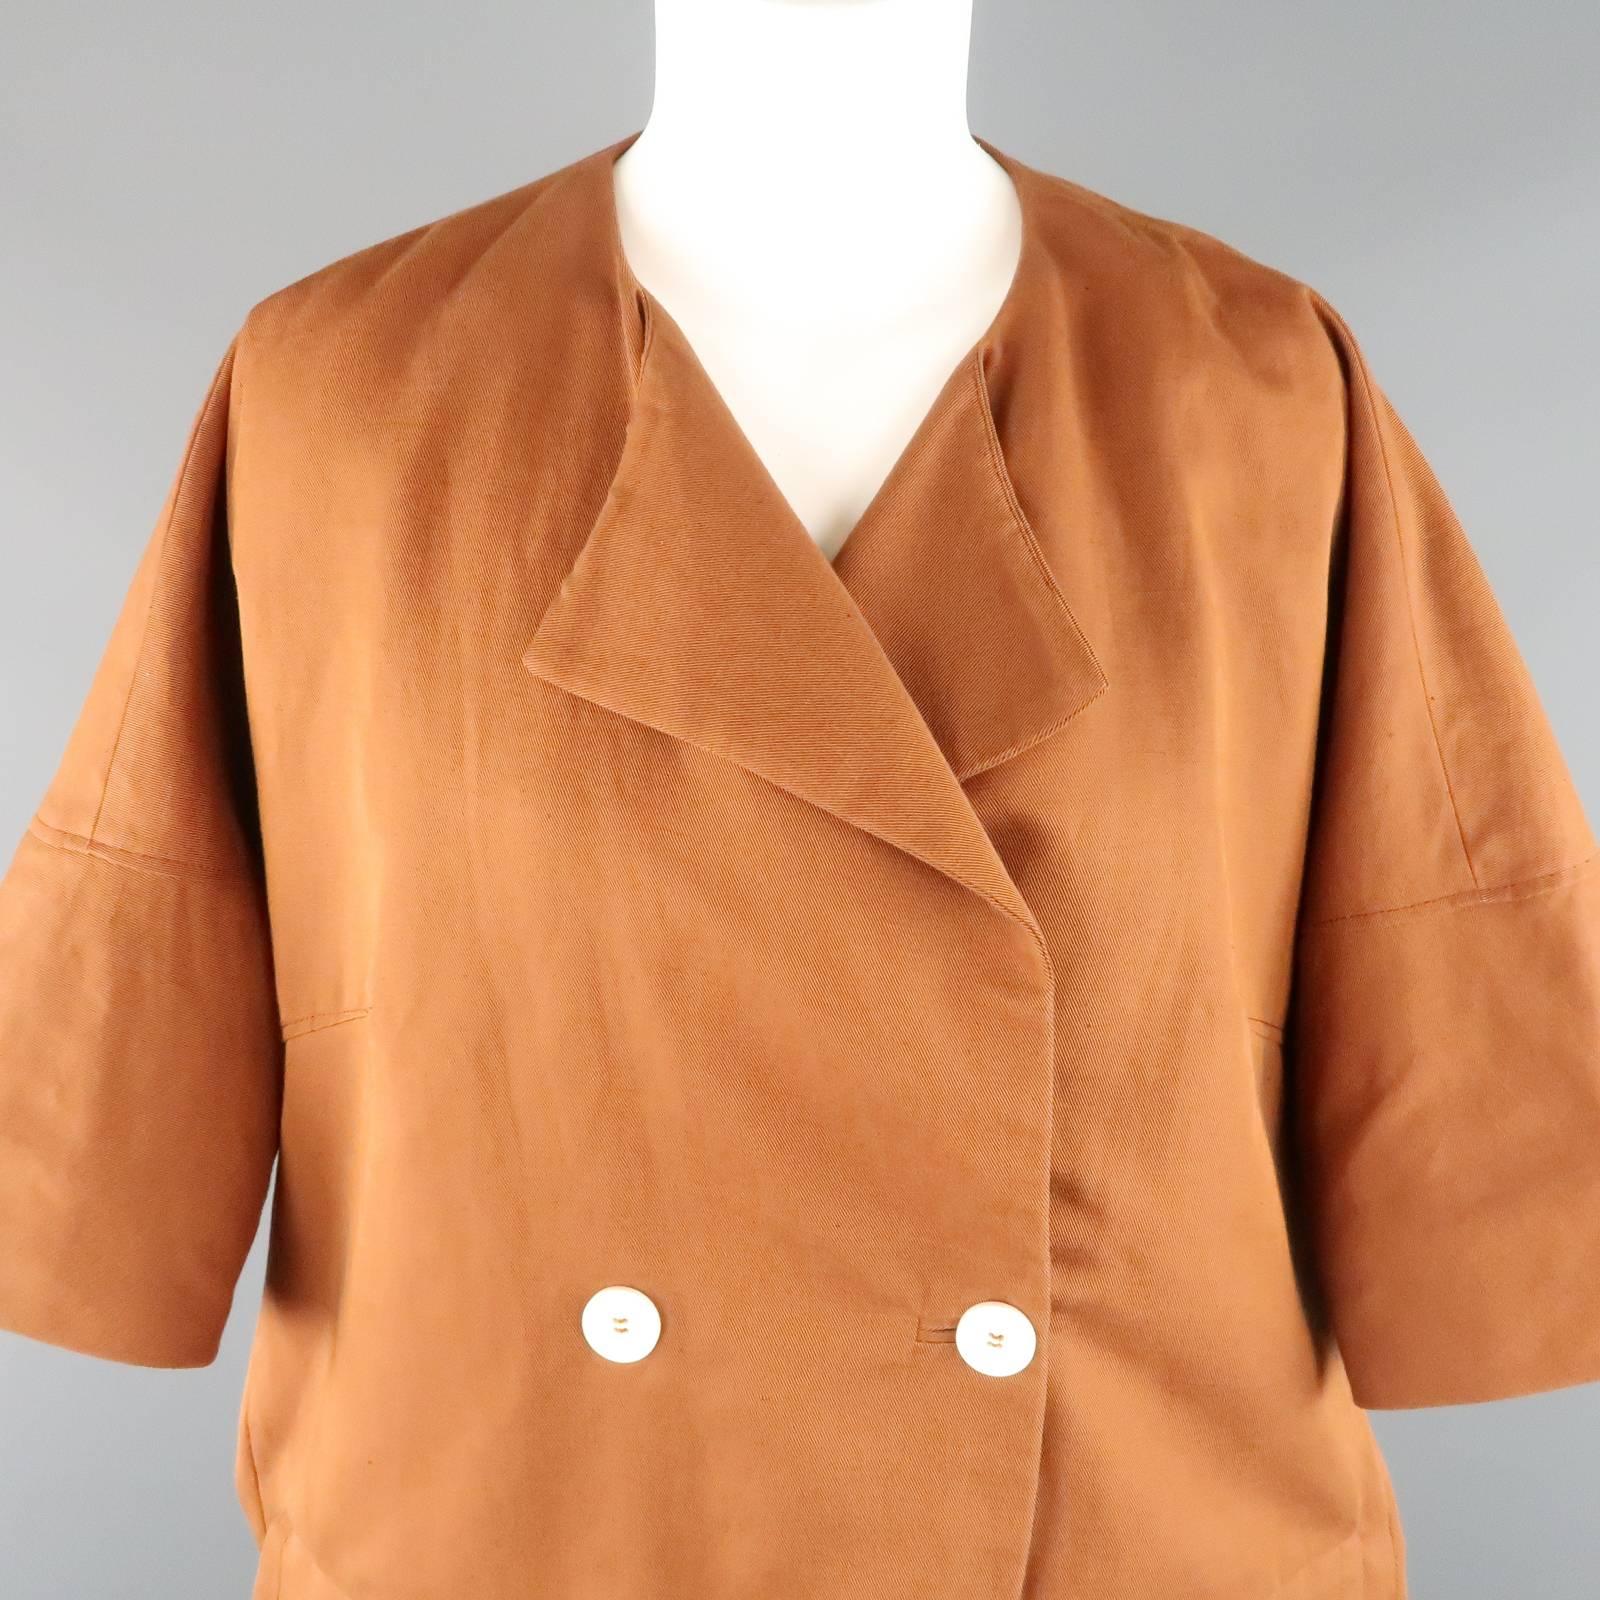 MARNI oversized cacoon coat comes in a gorgeous rust cotton linen blend twill and features a round neck with pointed half lapel, double breasted cream button closure, flap pockets, and drop shoulder with cropped sleeves. Small mark on back. As-Is.